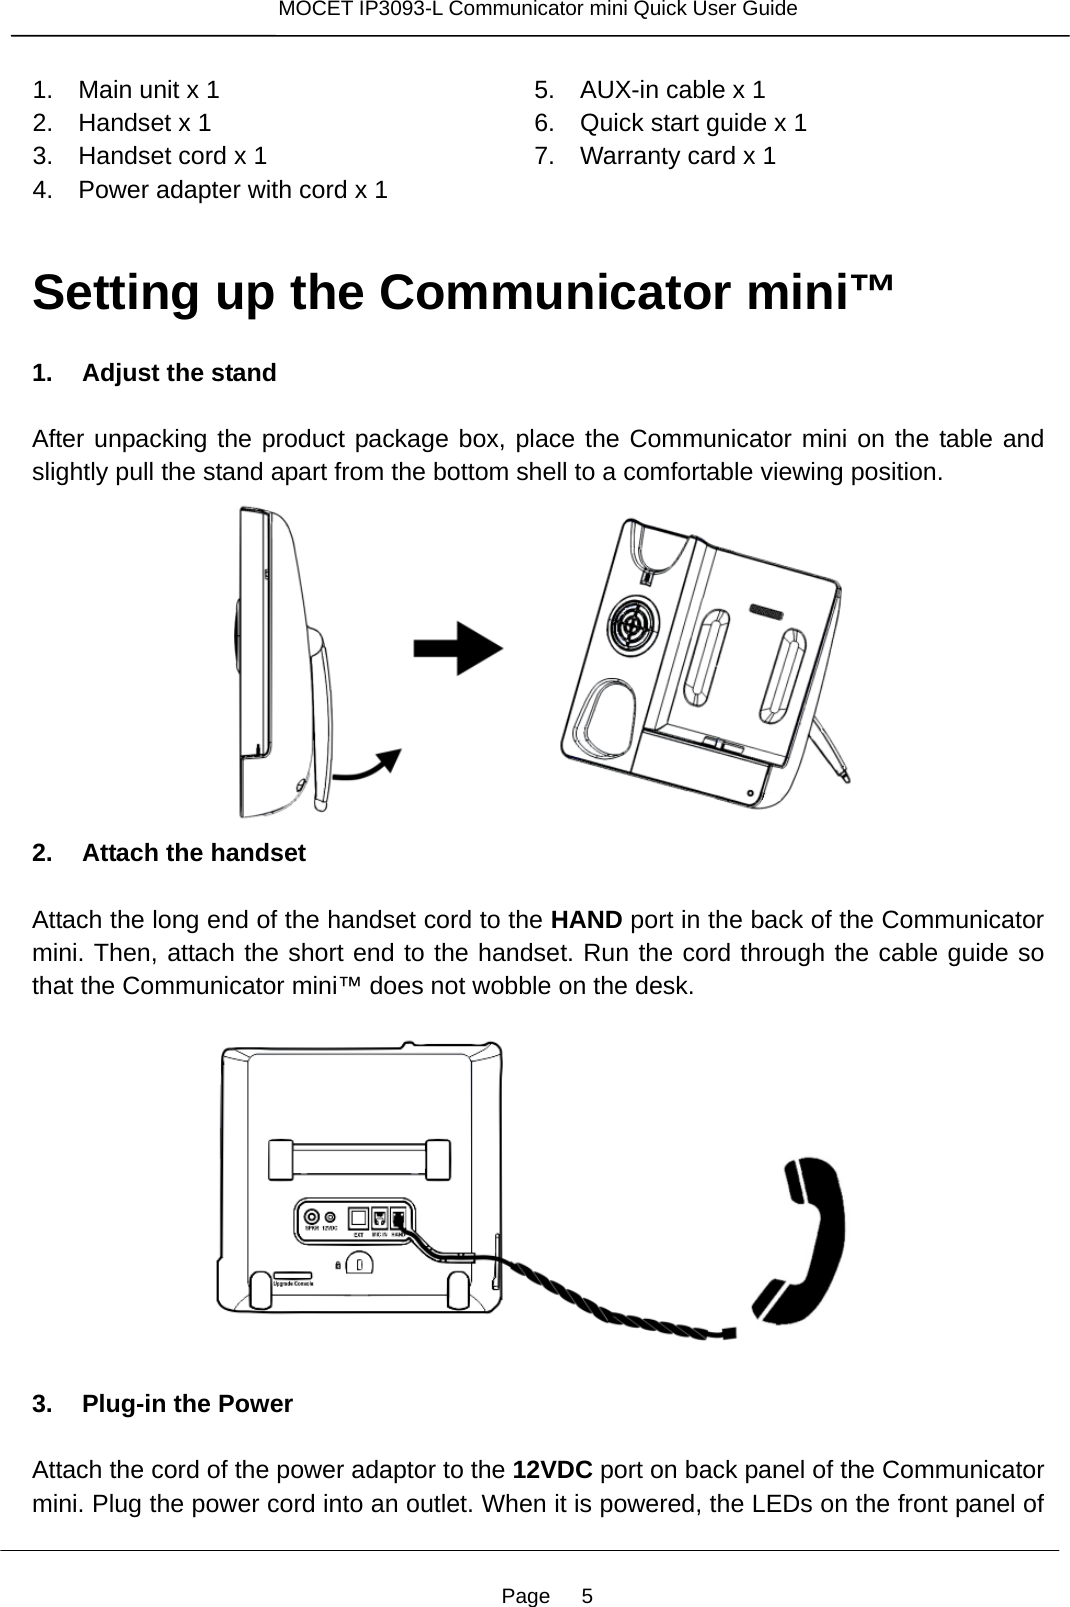 Page   5 MOCET IP3093-L Communicator mini Quick User Guide  1.   Main unit x 1 2.   Handset x 1 3.   Handset cord x 1 4.   Power adapter with cord x 1 5.   AUX-in cable x 1 6.   Quick start guide x 1 7.   Warranty card x 1   Setting up the Communicator mini™  1. Adjust the stand  After unpacking the product package box, place the Communicator mini on the table and slightly pull the stand apart from the bottom shell to a comfortable viewing position.      2. Attach the handset  Attach the long end of the handset cord to the HAND port in the back of the Communicator mini. Then, attach the short end to the handset. Run the cord through the cable guide so that the Communicator mini™ does not wobble on the desk.    3. Plug-in the Power  Attach the cord of the power adaptor to the 12VDC port on back panel of the Communicator mini. Plug the power cord into an outlet. When it is powered, the LEDs on the front panel of 